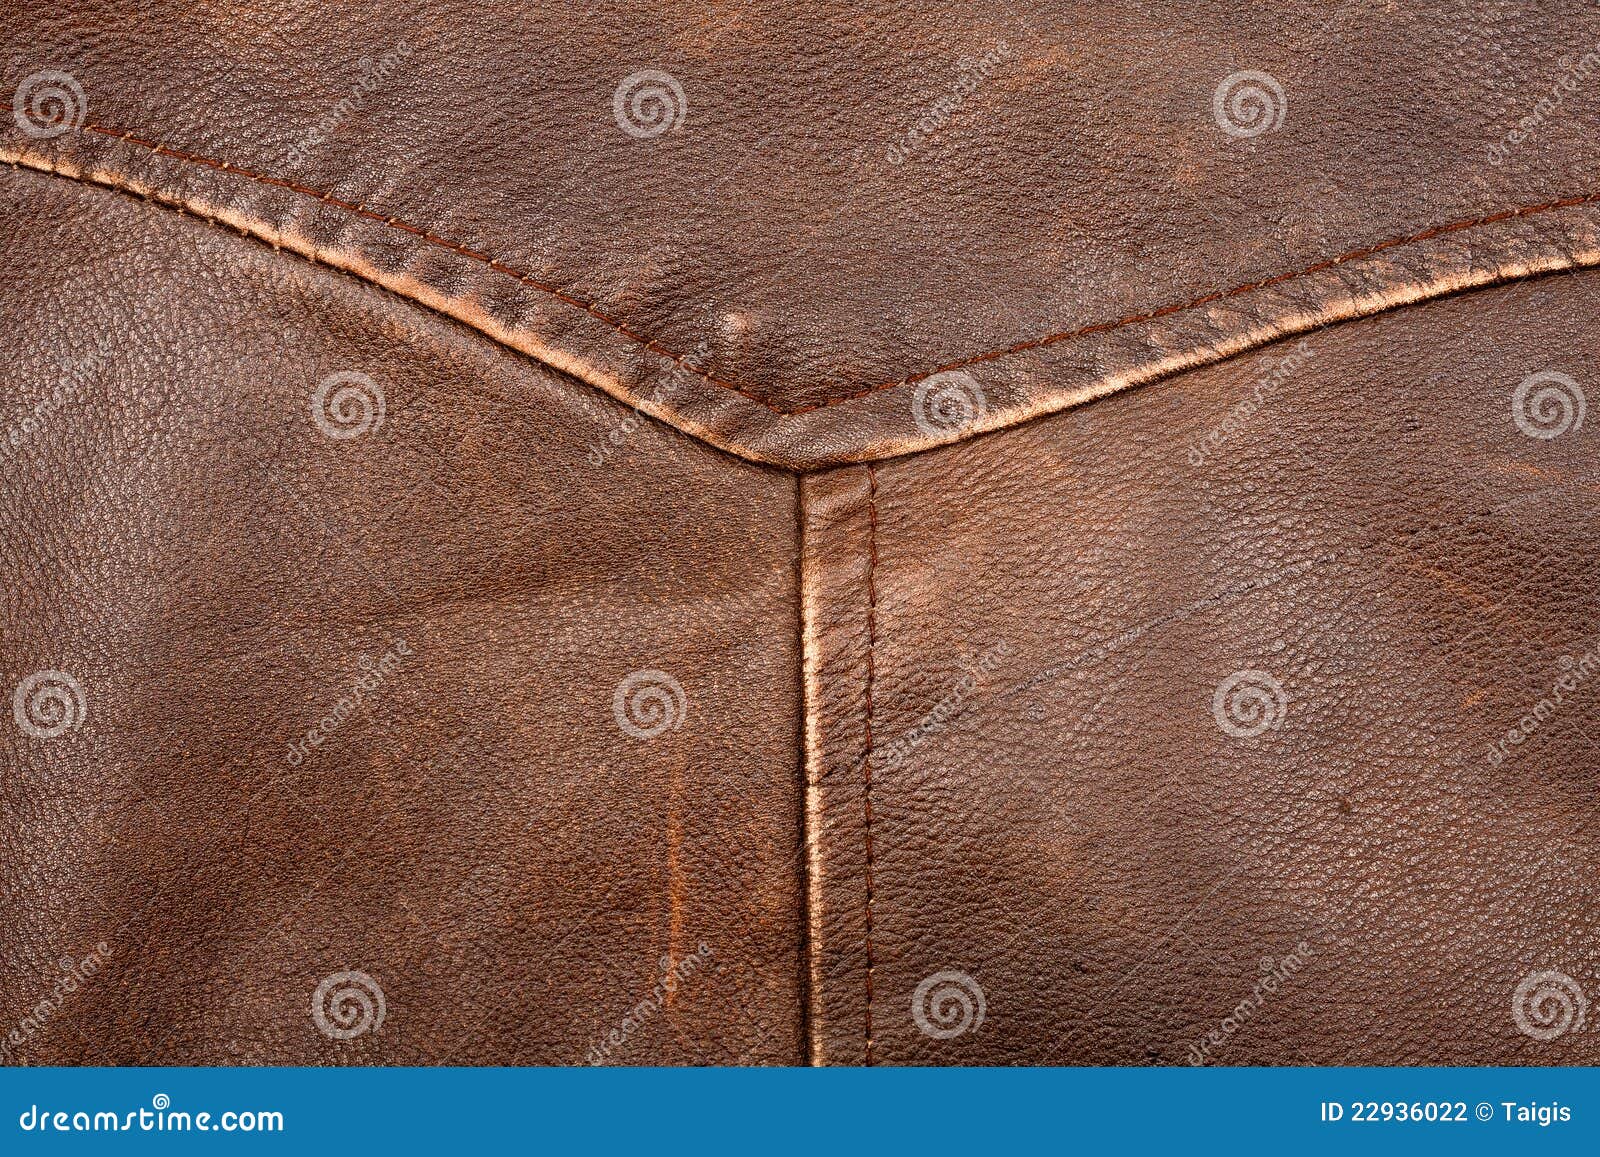 Seam on leather product stock photo. Image of brown, beige - 22936022